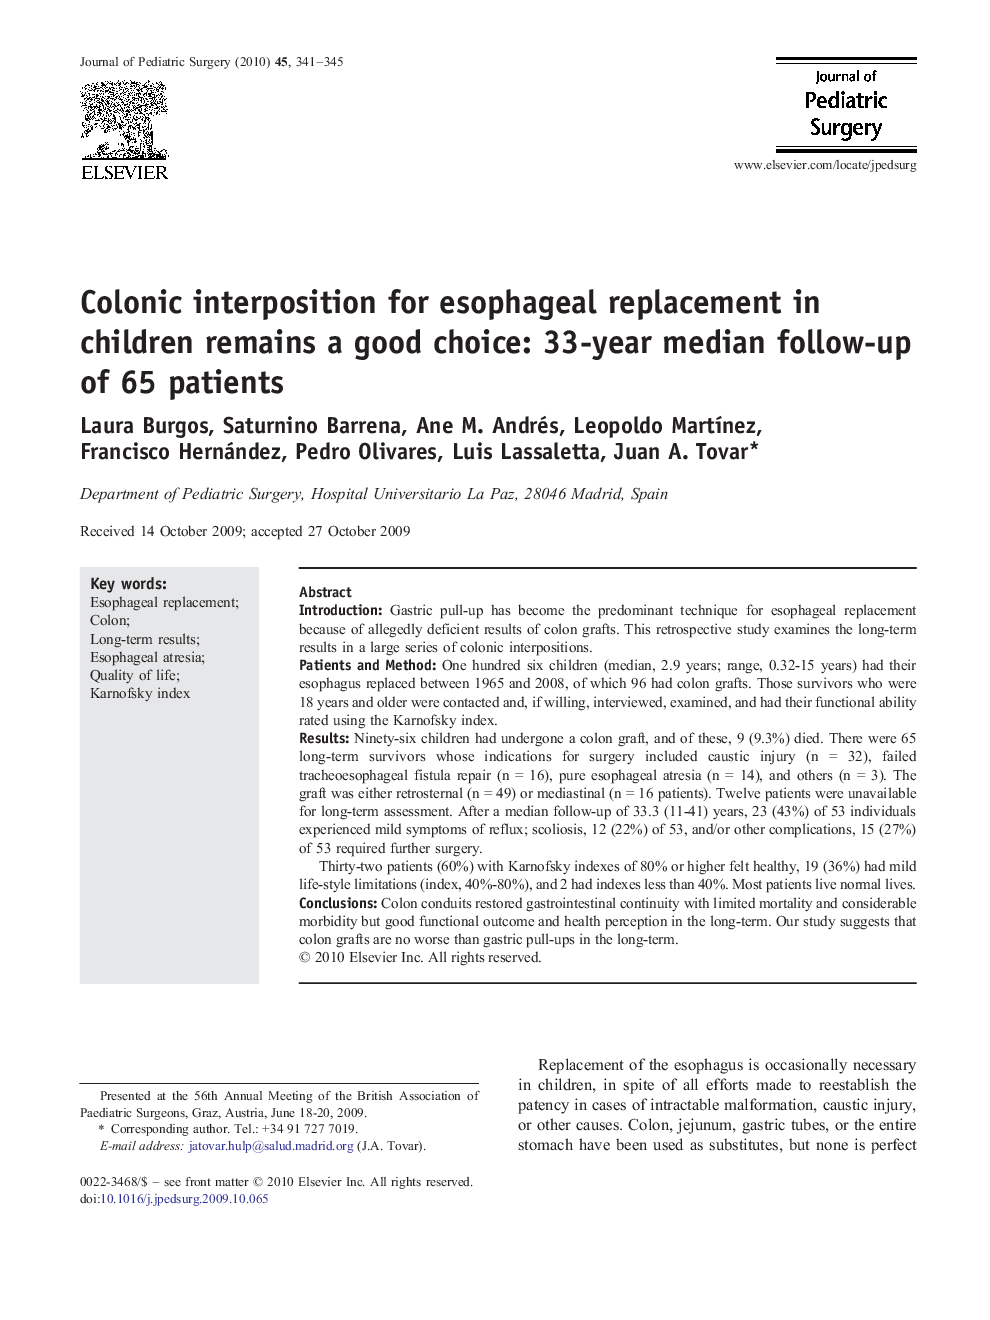 Colonic interposition for esophageal replacement in children remains a good choice: 33-year median follow-up of 65 patients 